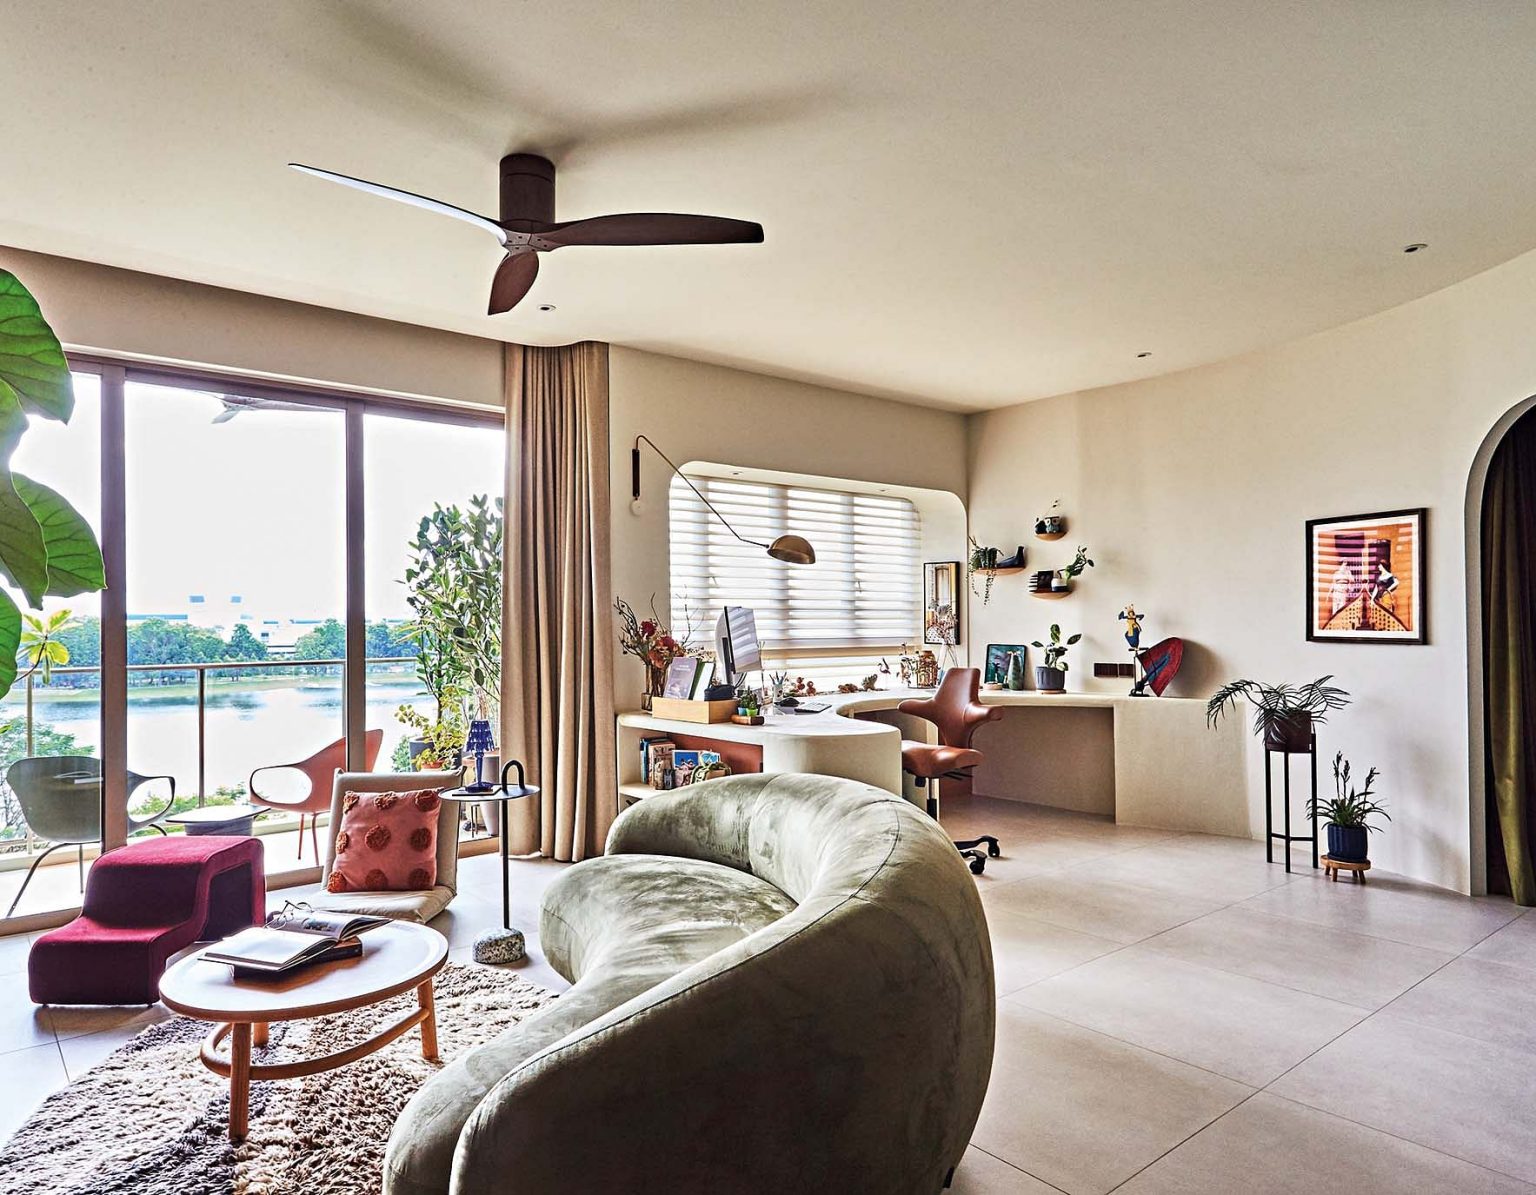 House Tour: A 3-room Bedok Reservoir condo with lots of soft curved lines and walls